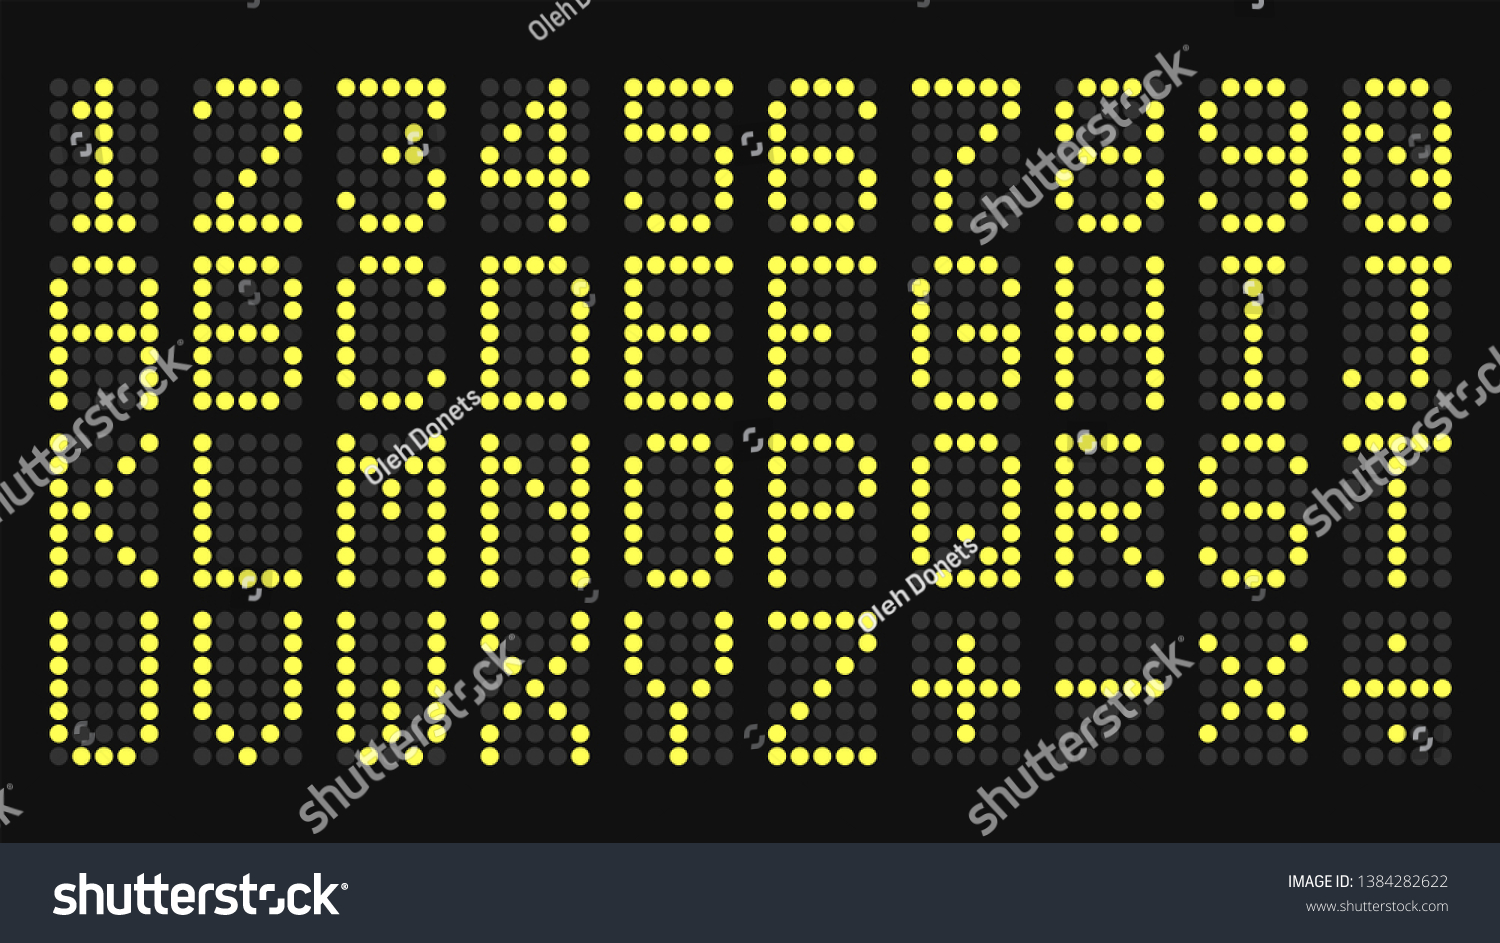 SVG of Digital letters and numbers display board. Vector illustration isolated on black background. svg